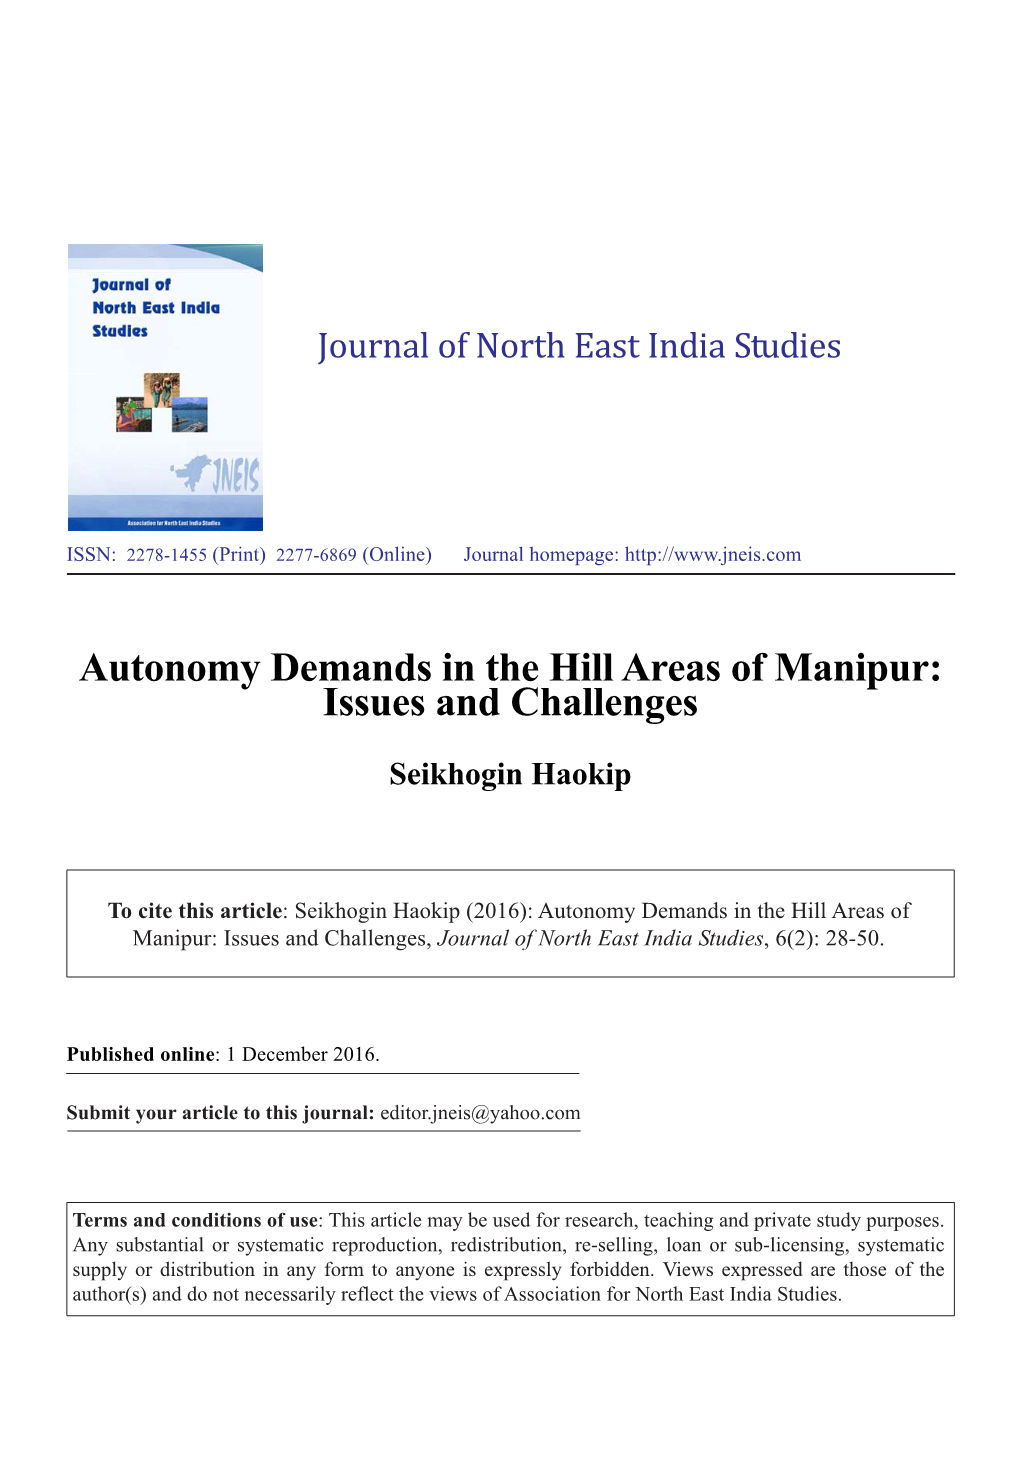 Autonomy Demands in the Hill Areas of Manipur: Issues and Challenges